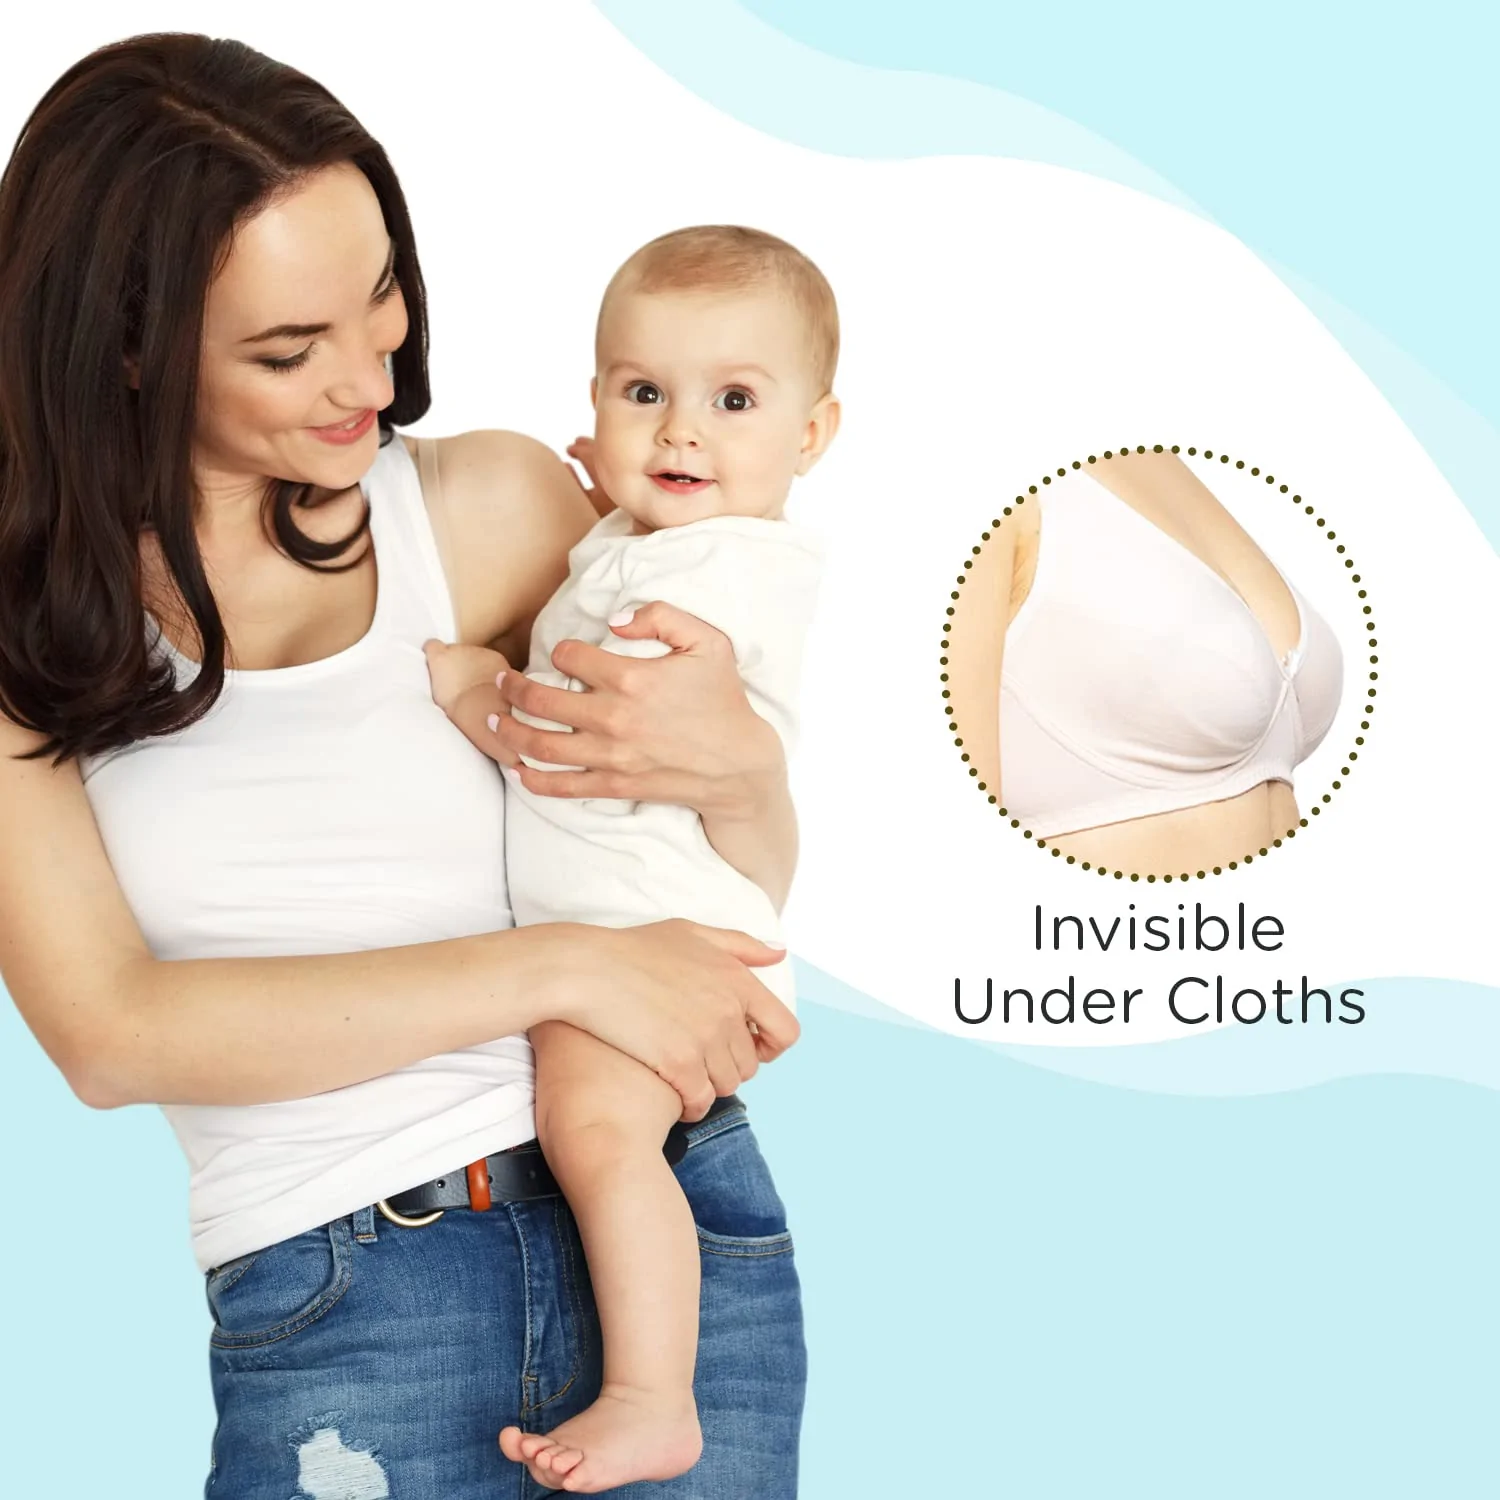 Mee Mee Ultra Thin Super Absorbent Disposable Maternity Nursing Breast Pads  (20 Pads with 4 Free Pads)